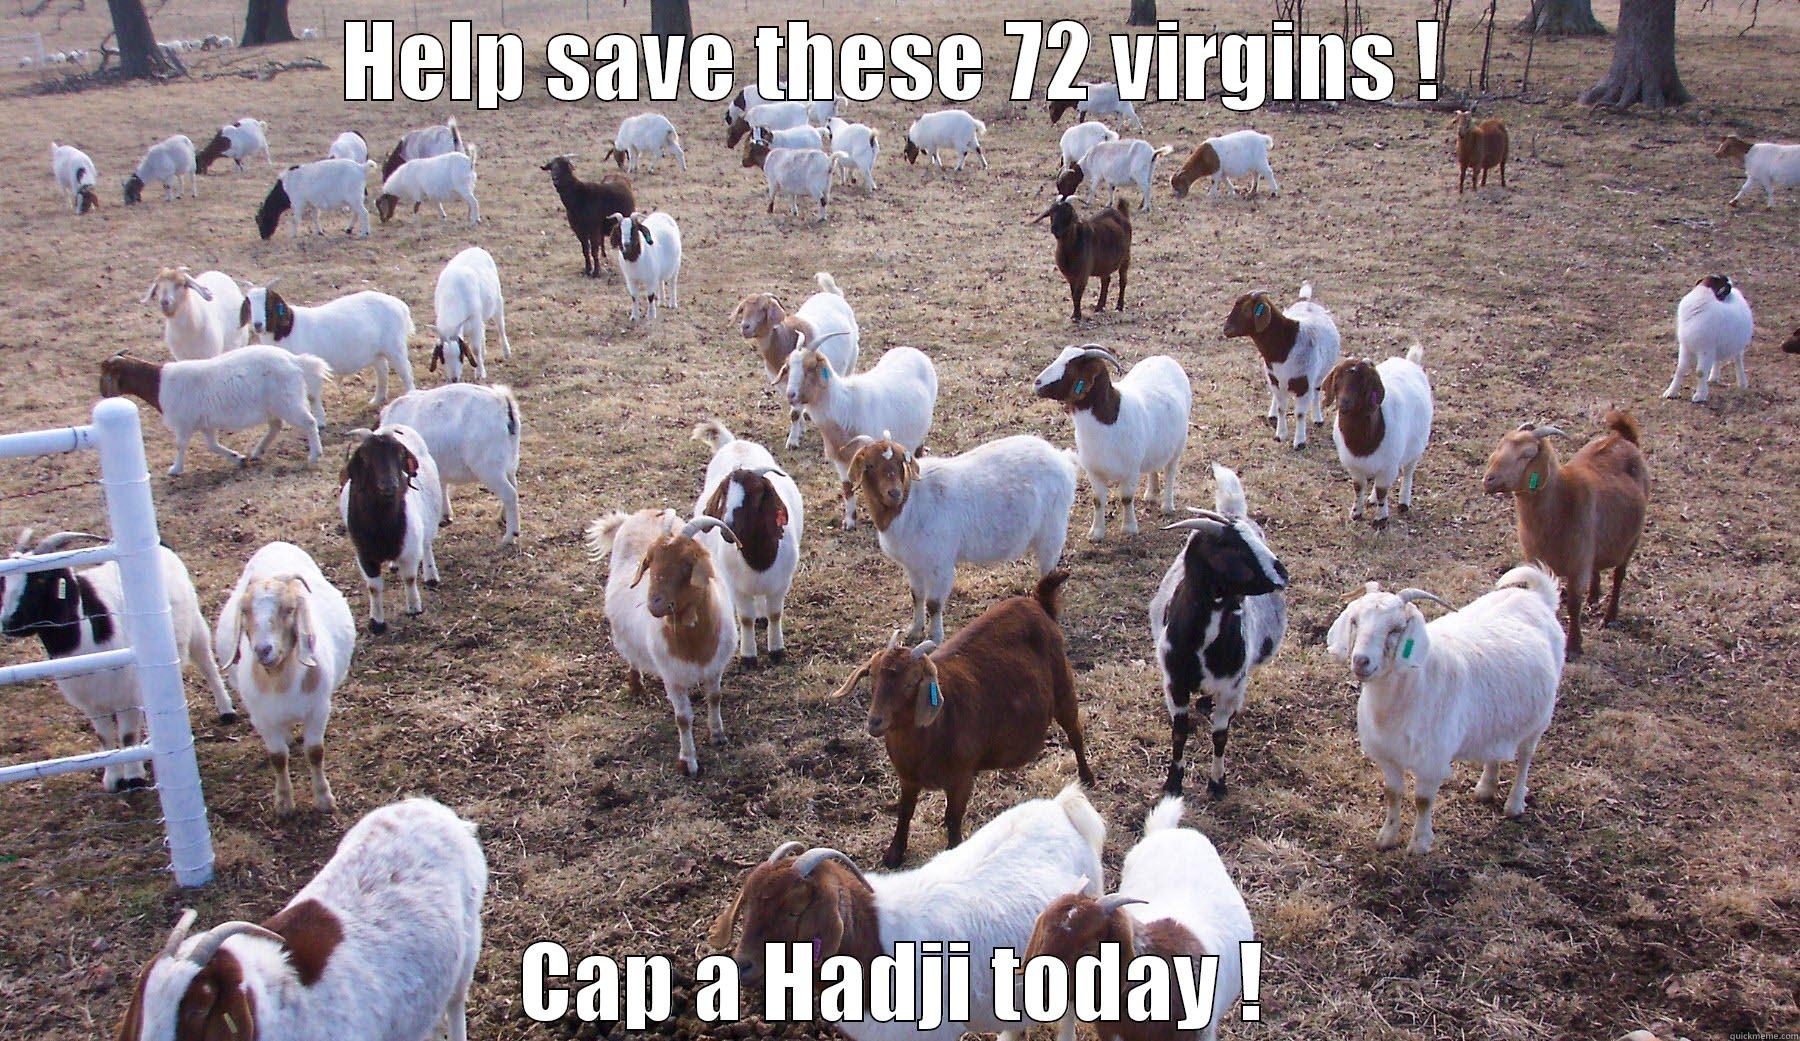 HELP SAVE THESE 72 VIRGINS ! CAP A HADJI TODAY ! Misc